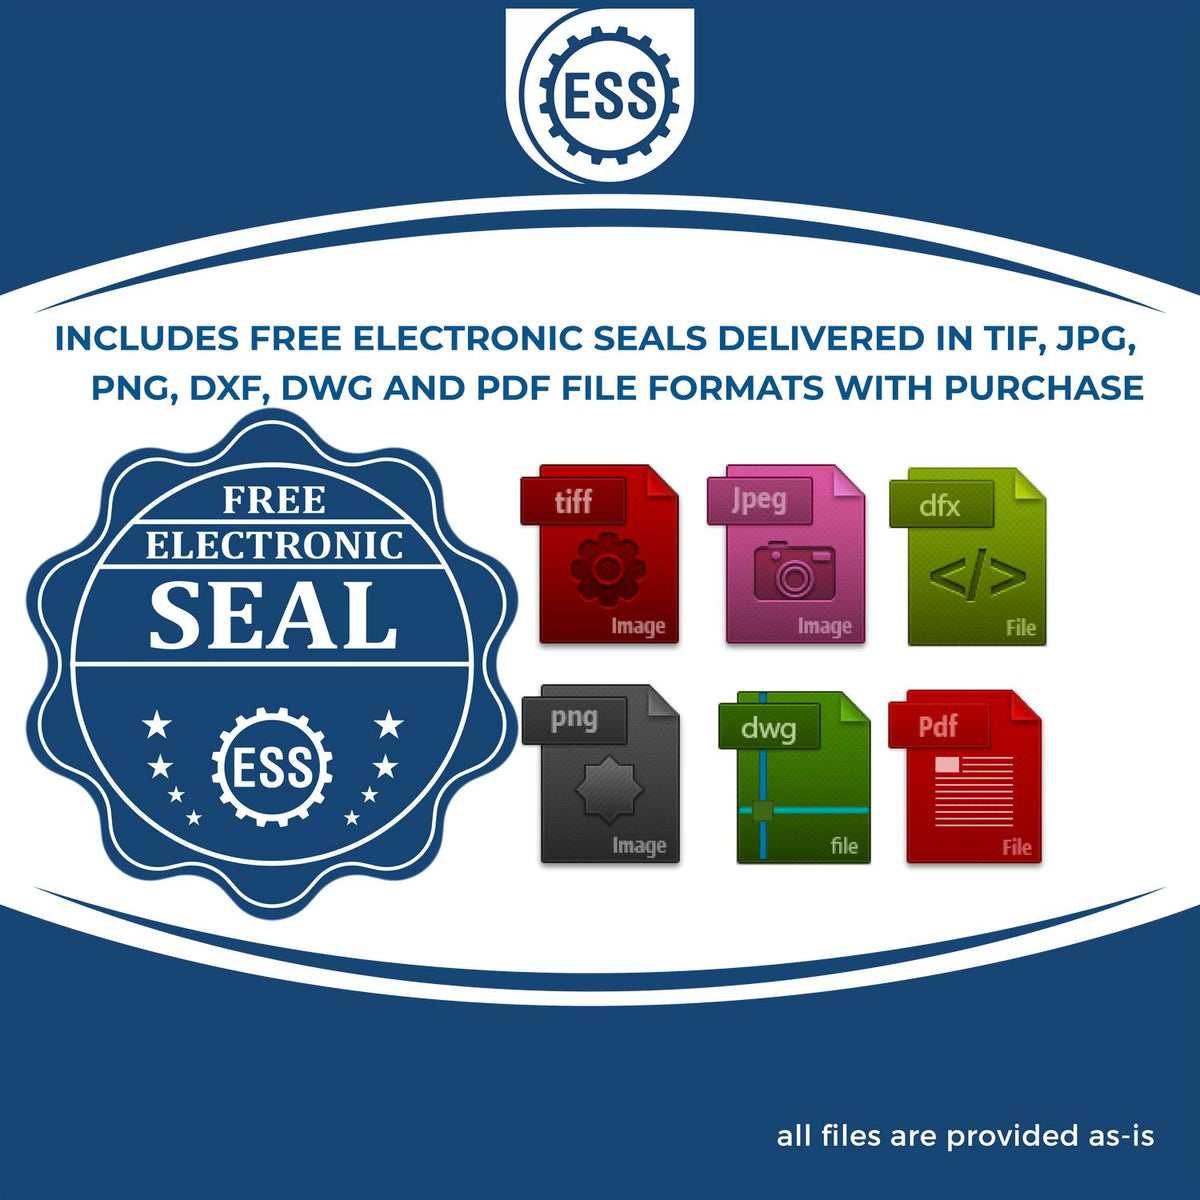 An infographic for the free electronic seal for the Colorado Professional Engineer Seal Stamp illustrating the different file type icons such as DXF, DWG, TIF, JPG and PNG.